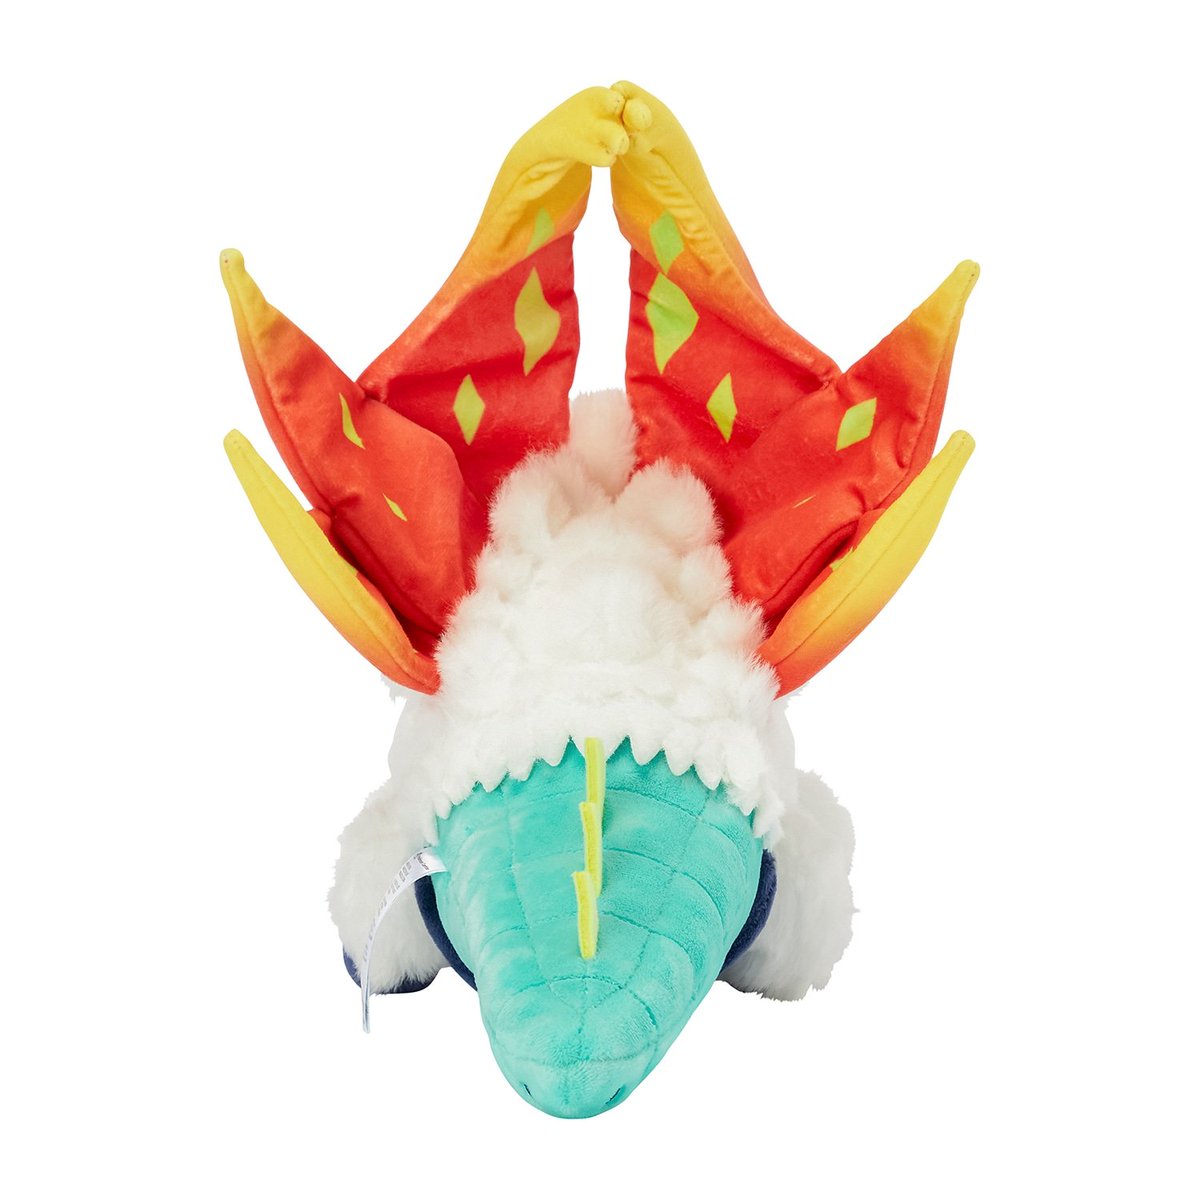 High-quality images of upcoming Pokémon Center Slither Wing plushie, releasing first in Japan